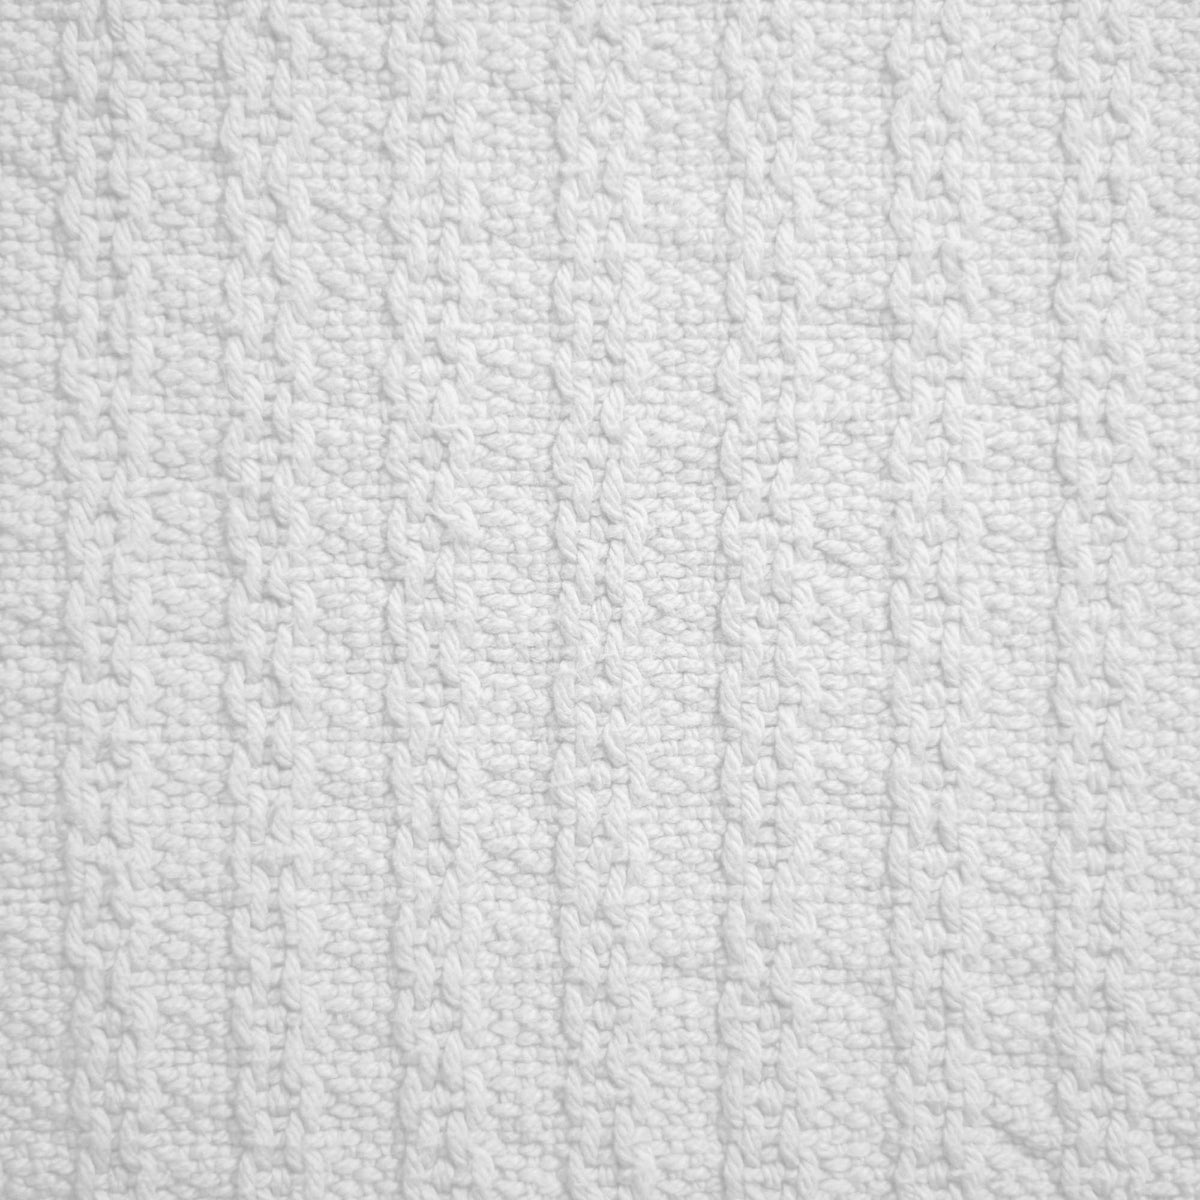 White Cable Weave Swatch - Cotton Blanket - Cable Weave - American Blanket Company